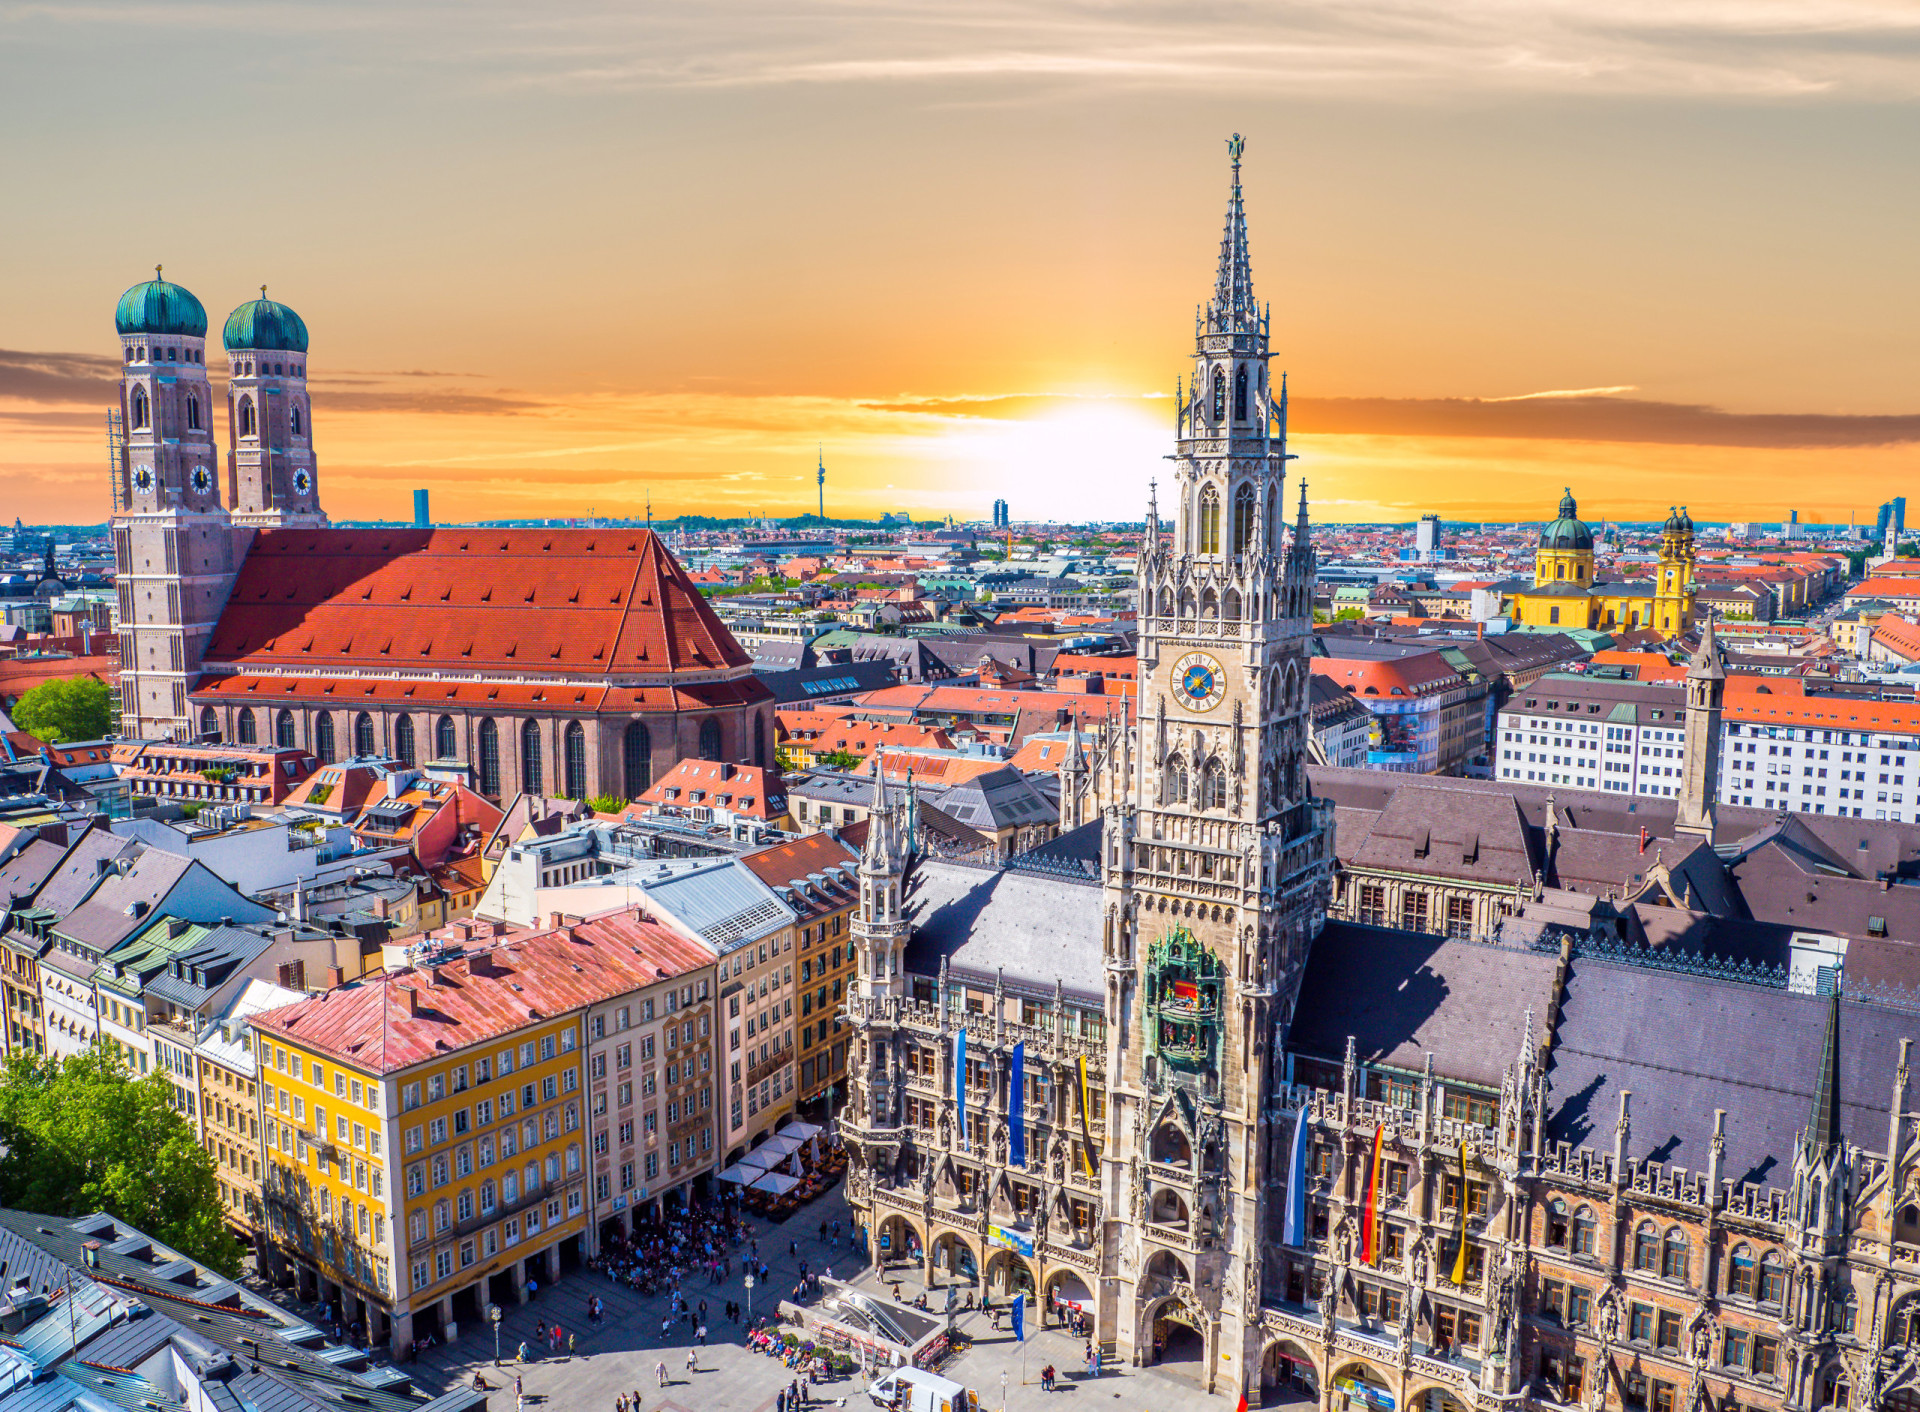 <p>Munich, for example, exudes Bavarian flavor and thrills the visitor with an appetizing mix of distinguished landmarks, engaging museums, and a countryside overlooked by the Alps.</p><p>You may also like:<a href="https://www.starsinsider.com/n/184091?utm_source=msn.com&utm_medium=display&utm_campaign=referral_description&utm_content=636762en-en"> Soap stars you forgot dated in real life!</a></p>